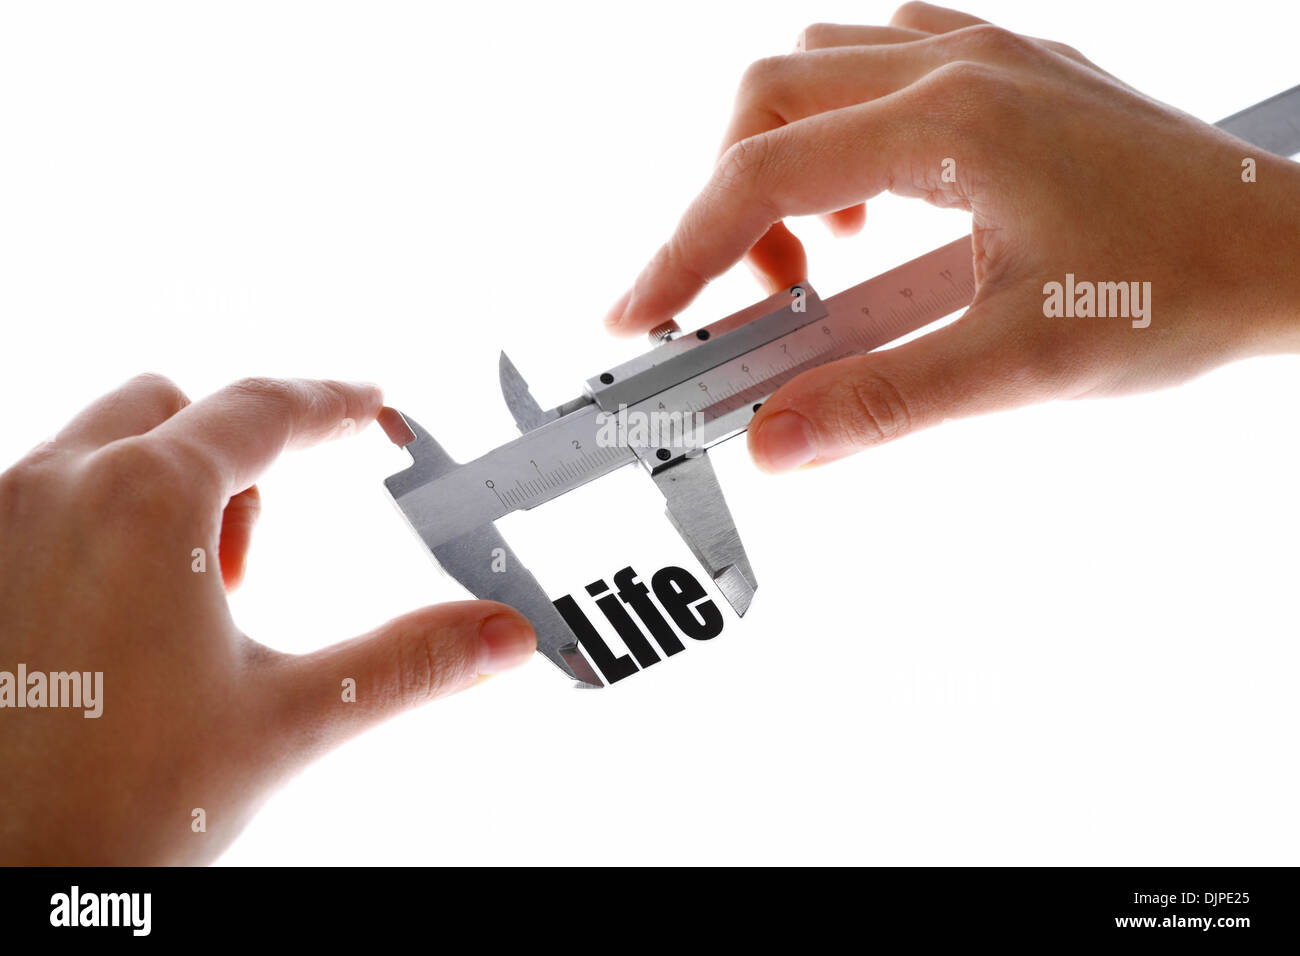 Two hands holding a caliper, measuring the word 'Life'. Stock Photo